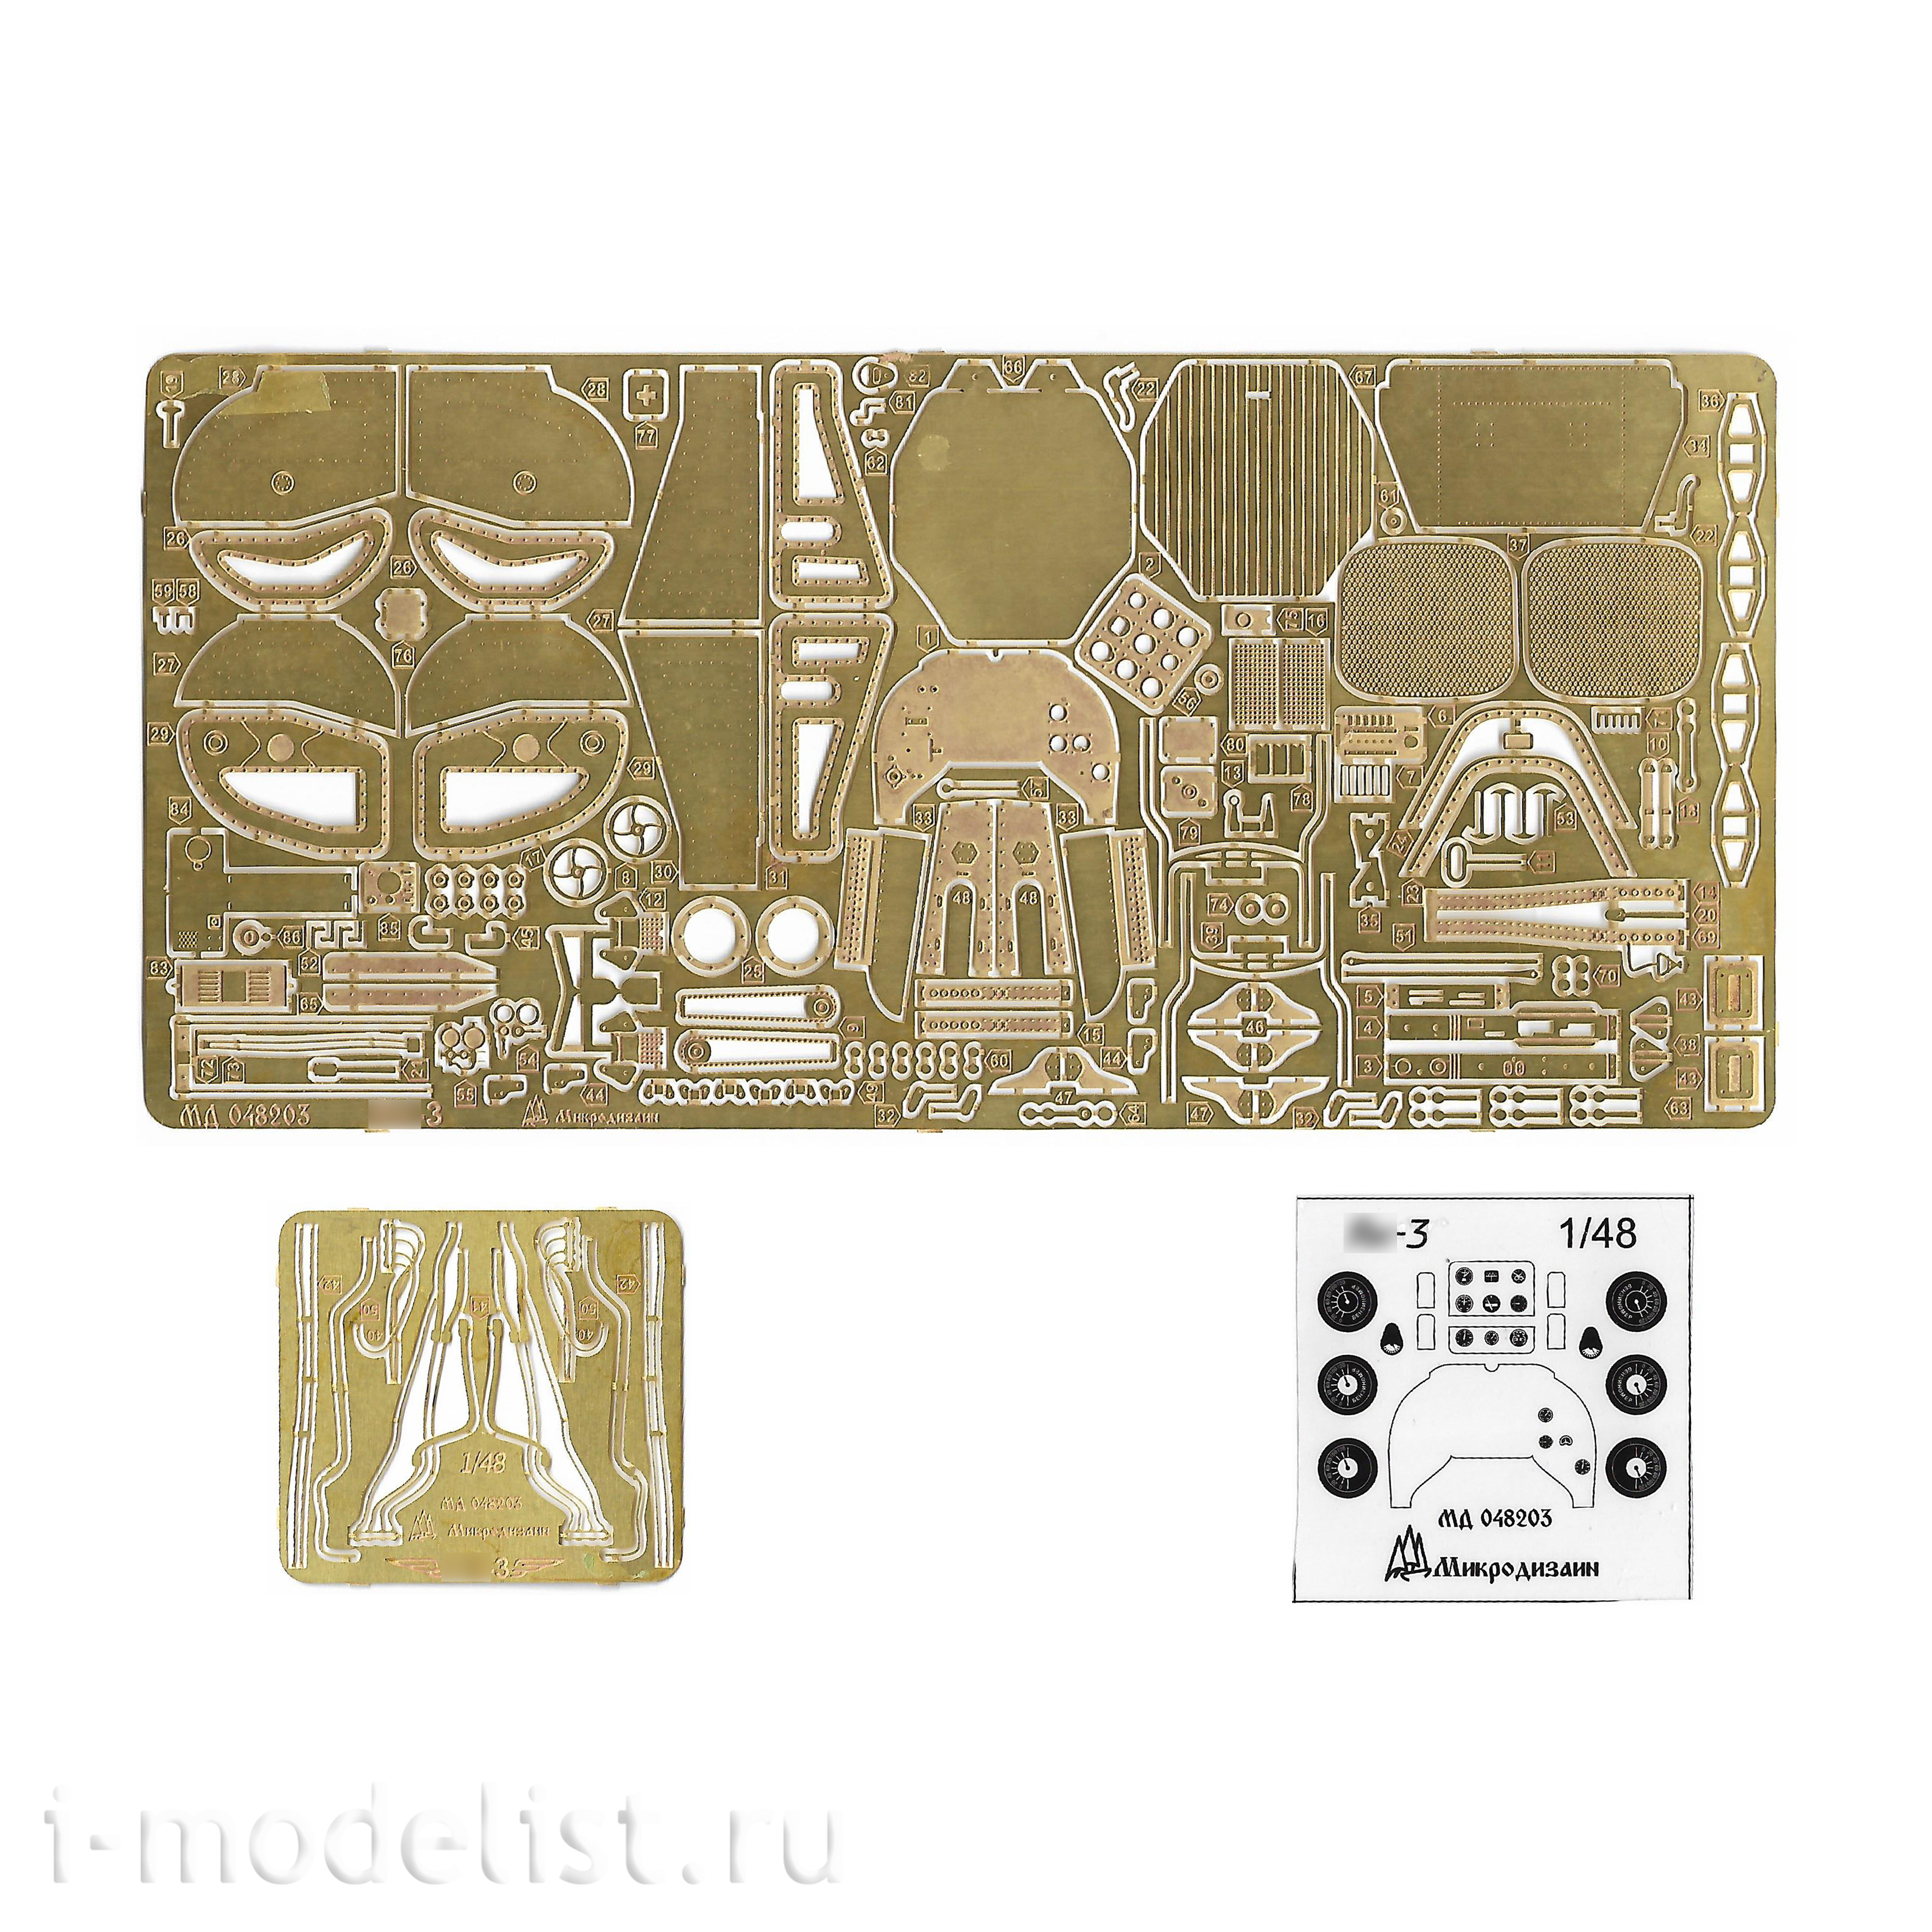 048203 Microdesign photo etched parts for 1/48 Yakovlev-3 from the Zvezda